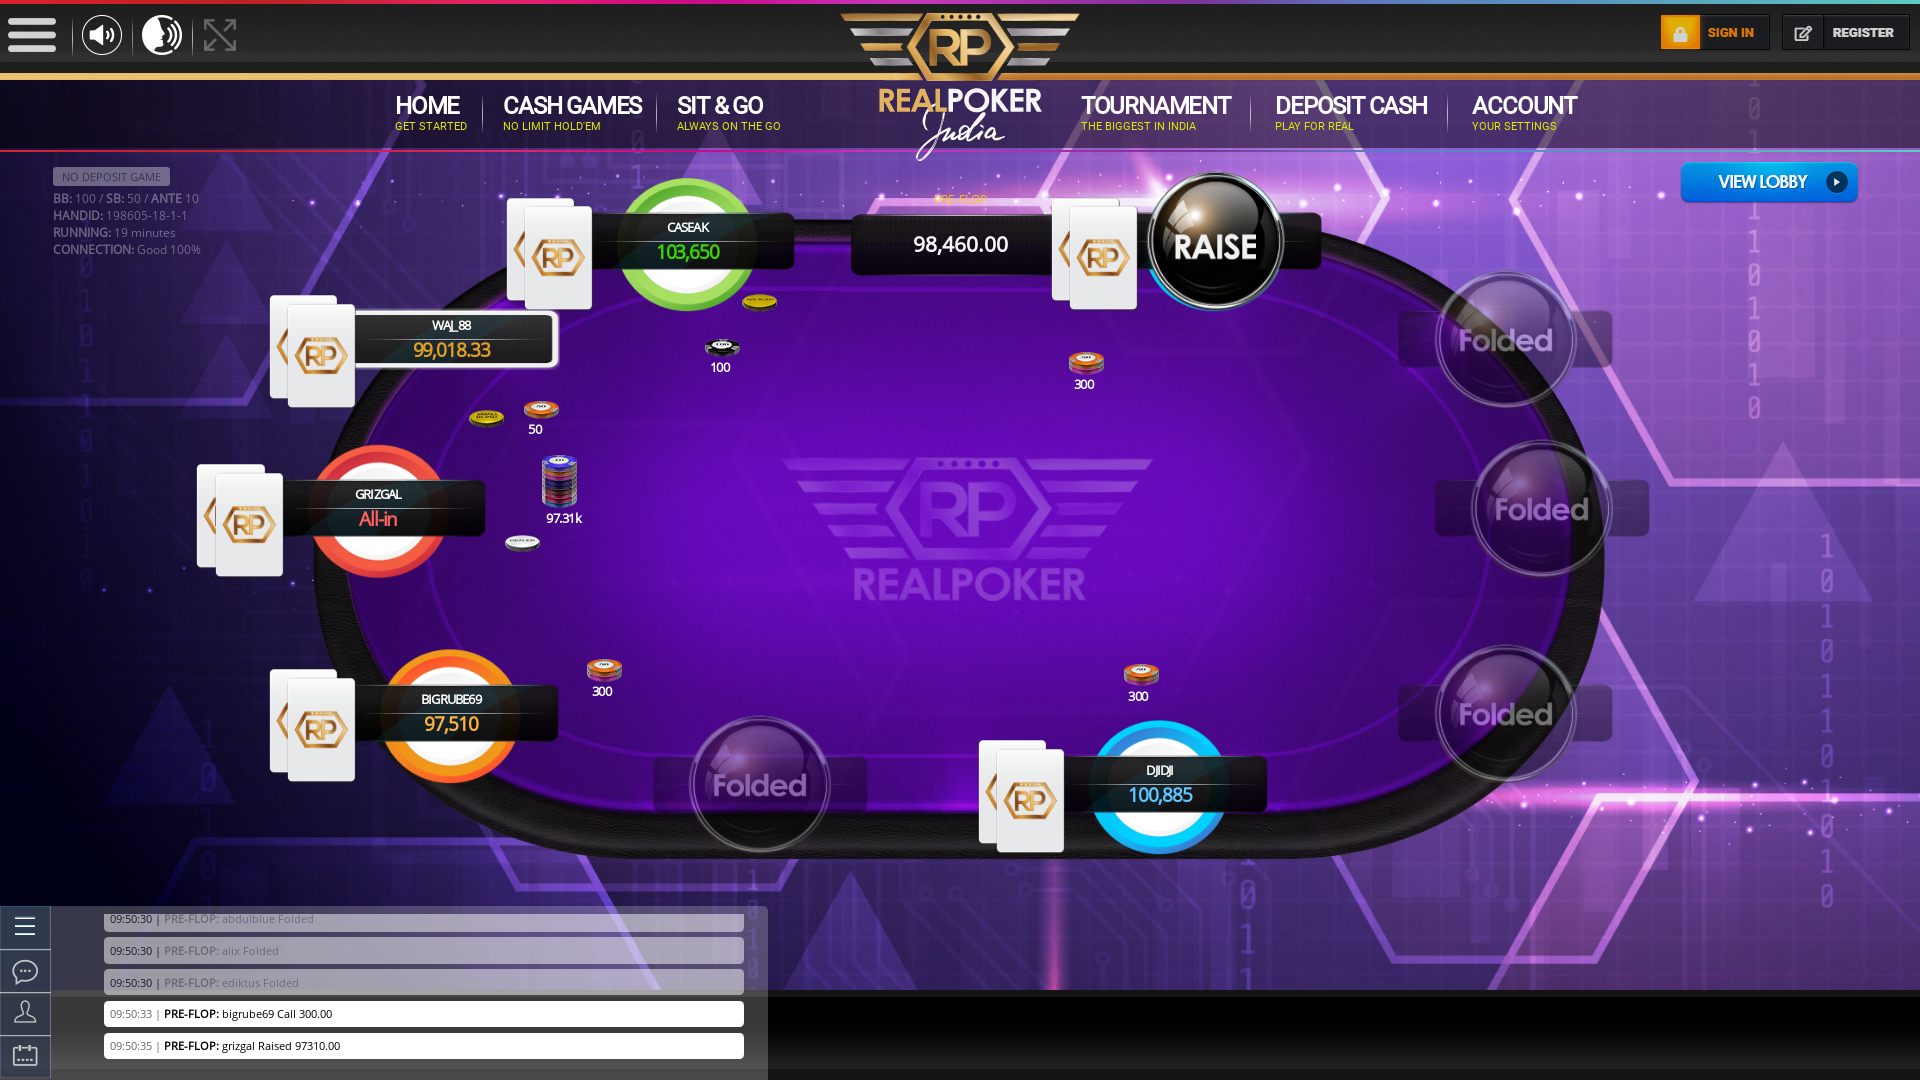 Bommanahalli, Bangalore texas holdem poker table on a 10 player table in the 19th minute of the meeting